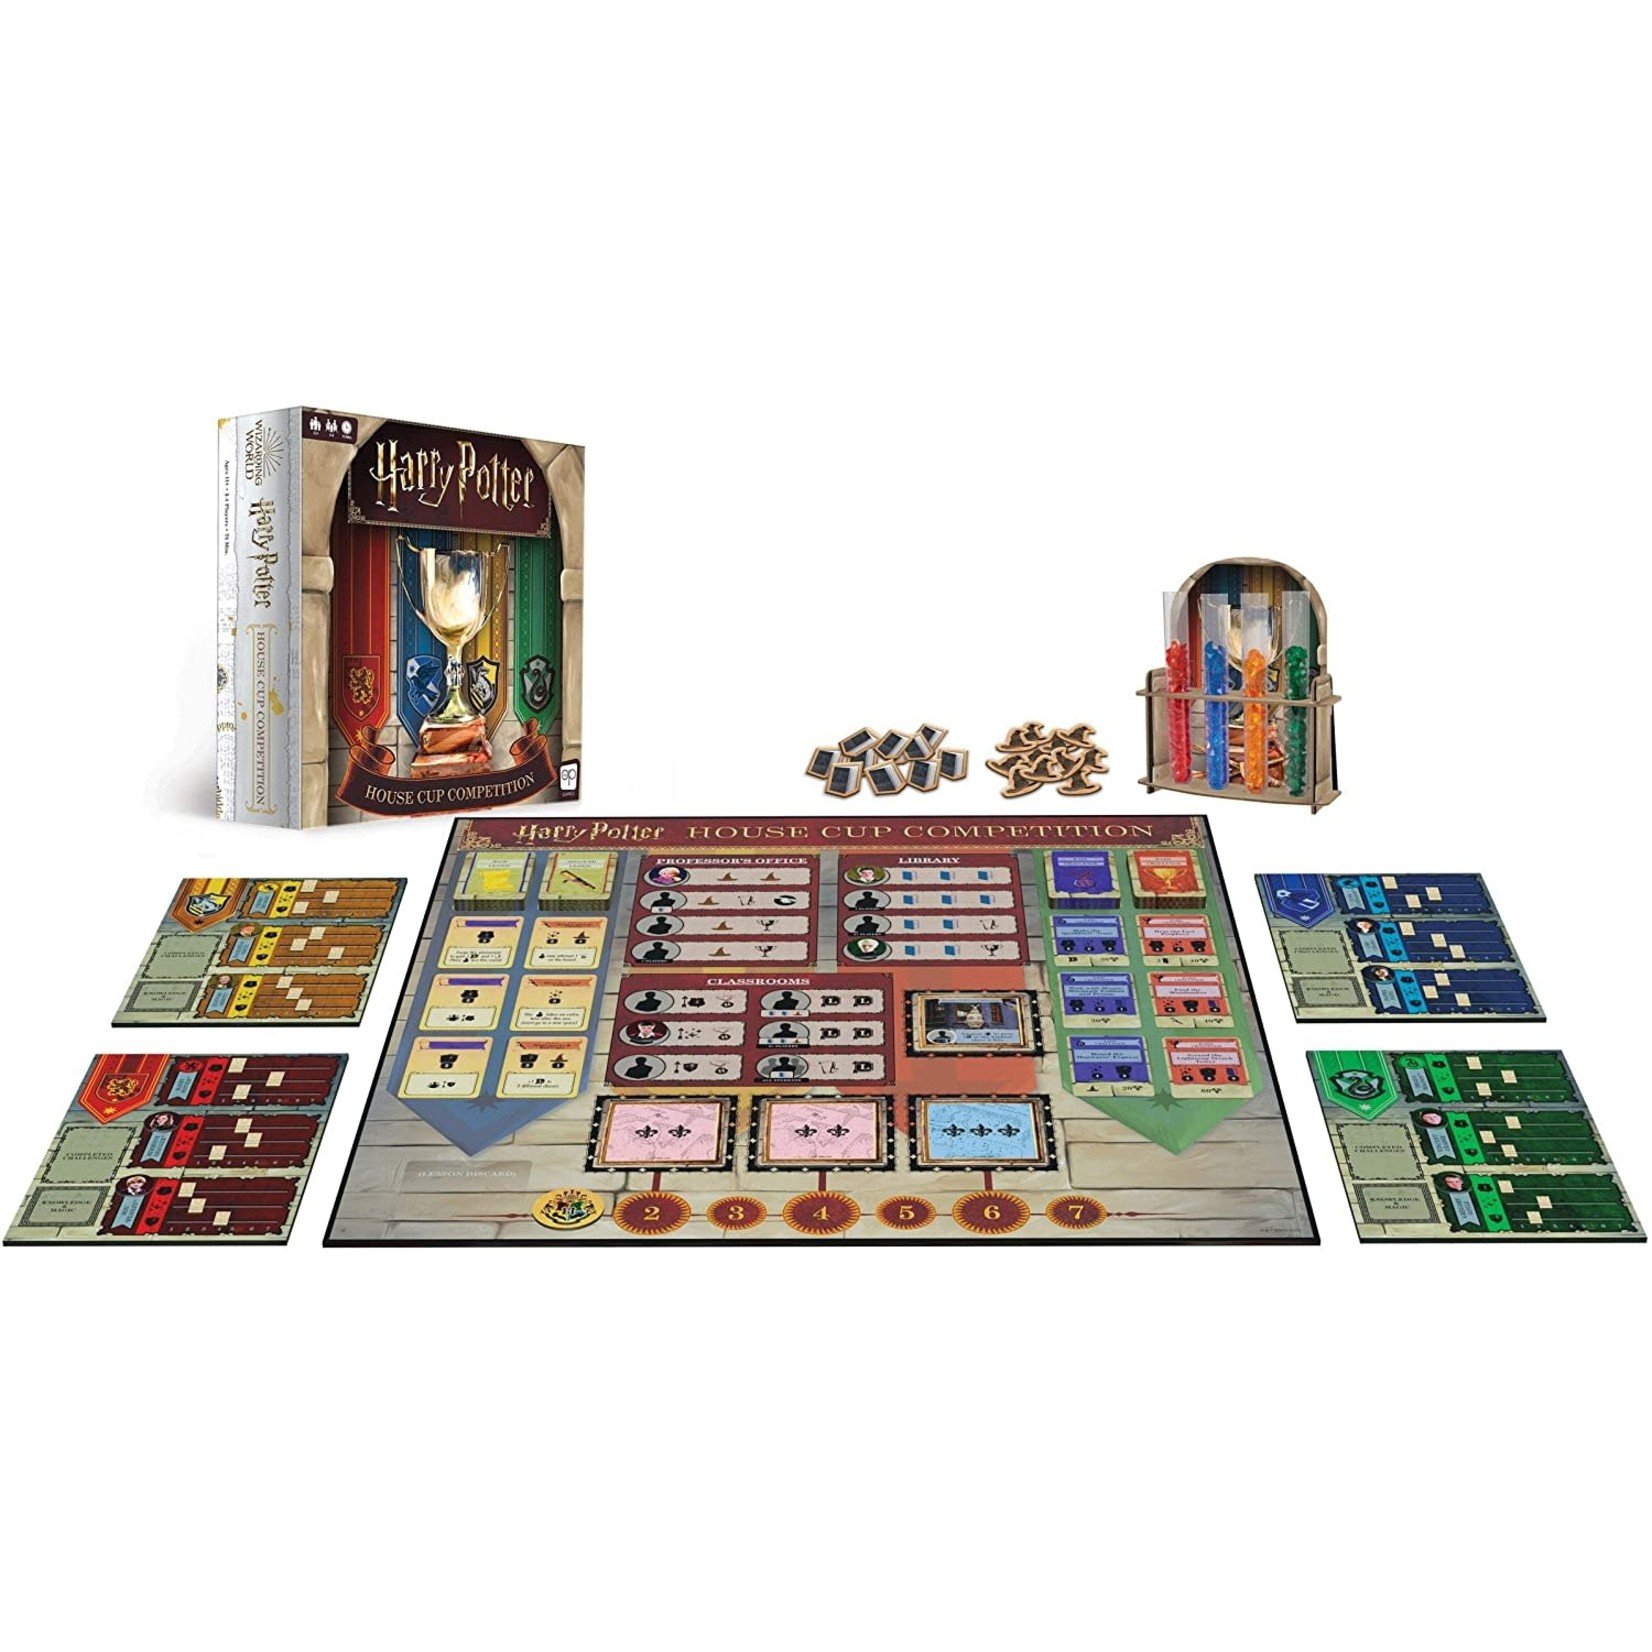 USAopoly Harry Potter: House Cup Competition